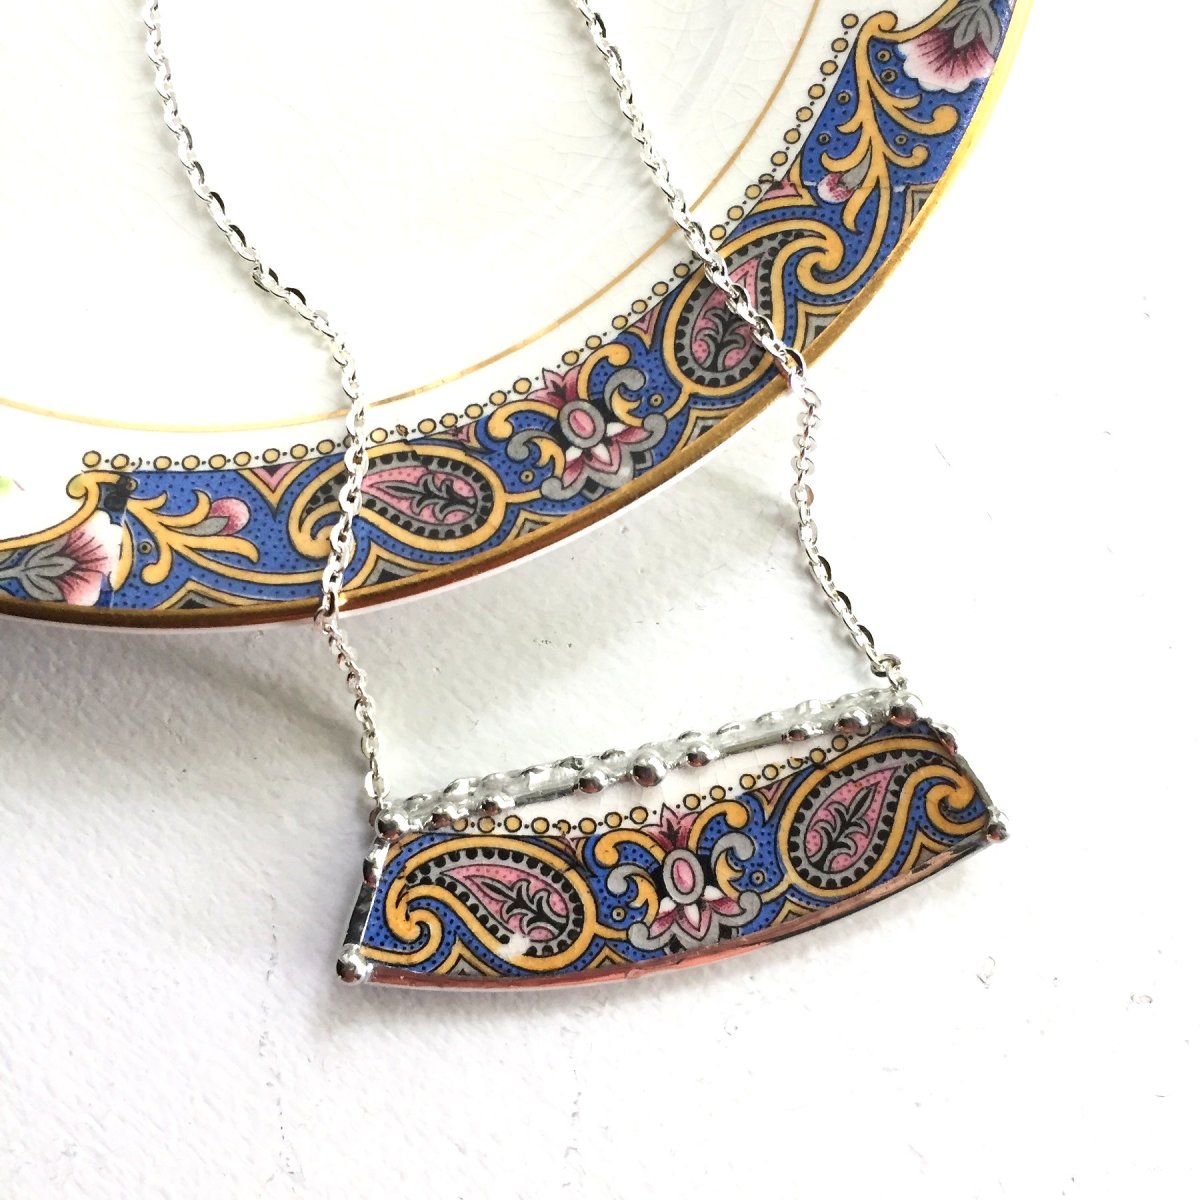 A Boho necklace in blue, from a beautiful antique paisley-designed china dinnerware plate.